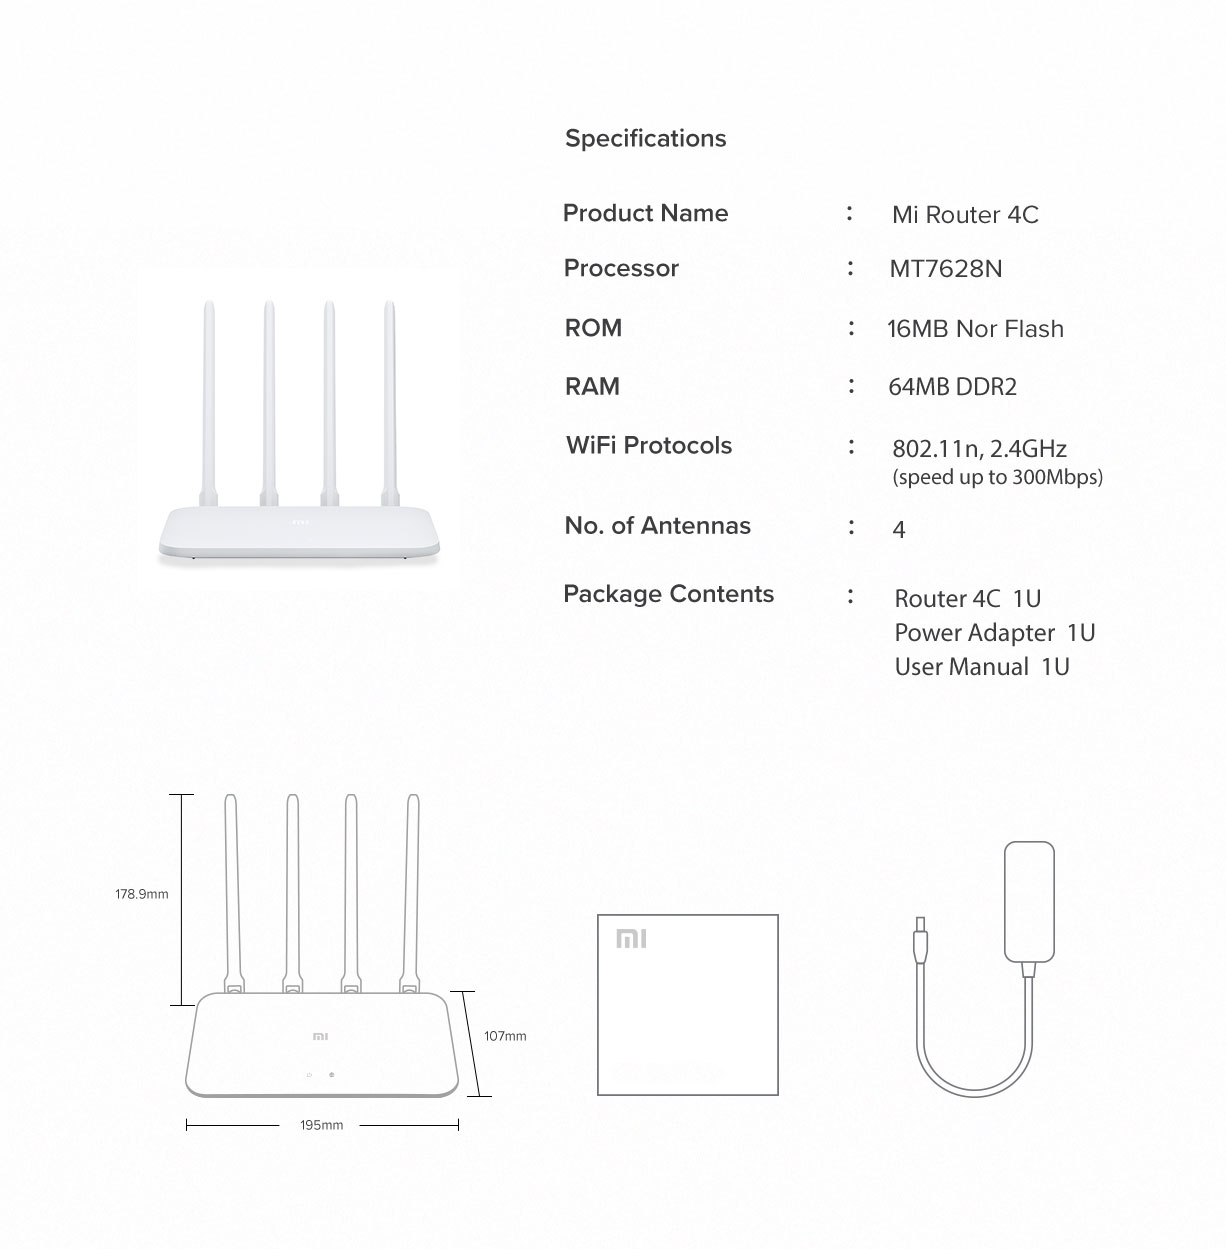 D825F781Fc91366F0Bec8F35B485D9D8 Xiaomi &Lt;Ul&Gt; &Lt;Li&Gt;&Lt;Span Class=&Quot;A-List-Item&Quot;&Gt; Four High-Gain Antenna Four External Omnidirectional Antennas With Up To 5Dbi Gain Strengthen Signal Gain Efficiency. Hugely Improve Transmission Performance. It Does An Outstanding Job In Many Complex Environments. &Lt;/Span&Gt;&Lt;/Li&Gt; &Lt;Li&Gt;&Lt;Span Class=&Quot;A-List-Item&Quot;&Gt; 64Mb Large Memory Featuring 64Mb Memory, The Data Transmission Is Much More Stable. It Ensures Fluent Operation And Provides Stability For The Connection Of More Smart Devices. The Maximum Connecting Devices Are 64. It Would Be An Unnecessary Home Device For You. &Lt;/Span&Gt;&Lt;/Li&Gt; &Lt;Li&Gt;&Lt;Span Class=&Quot;A-List-Item&Quot;&Gt; Faster Internet Surfing Play Game, Watch Video Or View Pages, You Can Select The Configuration Of The Router According To Your Application Scenes. You Can Also Let Xiaomi Router 4C Optimize Smartly For You. A Priority Of Single Configuration Of Internet Bandwidth Is Accessible To Have A Better Experience. &Lt;/Span&Gt;&Lt;/Li&Gt; &Lt;Li&Gt;&Lt;Span Class=&Quot;A-List-Item&Quot;&Gt; Smart Prevention Of Wifi Squatter Simple Or Internet Sharing Software Leads To Wifi Squatter. However, Xiaomi Router 4C Can Alarm You When There Is A New Network Connection. If Encountered High-Risk Connection, You Can Blacklist It Or Prevent It By Safety Level. &Lt;/Span&Gt;&Lt;/Li&Gt; &Lt;Li&Gt;&Lt;Span Class=&Quot;A-List-Item&Quot;&Gt; One Key Acceleration Turn On Xiaomi Wifi App, Find The Tool Kit And Slightly Click &Quot;Wifi Optimization&Quot; To Make Multi-Dimensional Auto-Check And Optimize The Wifi Communication Channel. Remote Control Use Xiao Wifi App To Manage Network Freely. Check The Network Status Even You Are Away From Home. &Lt;/Span&Gt;&Lt;/Li&Gt; &Lt;/Ul&Gt; Xiaomi Xiaomi Mi Router 4C Global Version (300Mbps) 4 Antennas Wireless Routers Repeater For Home